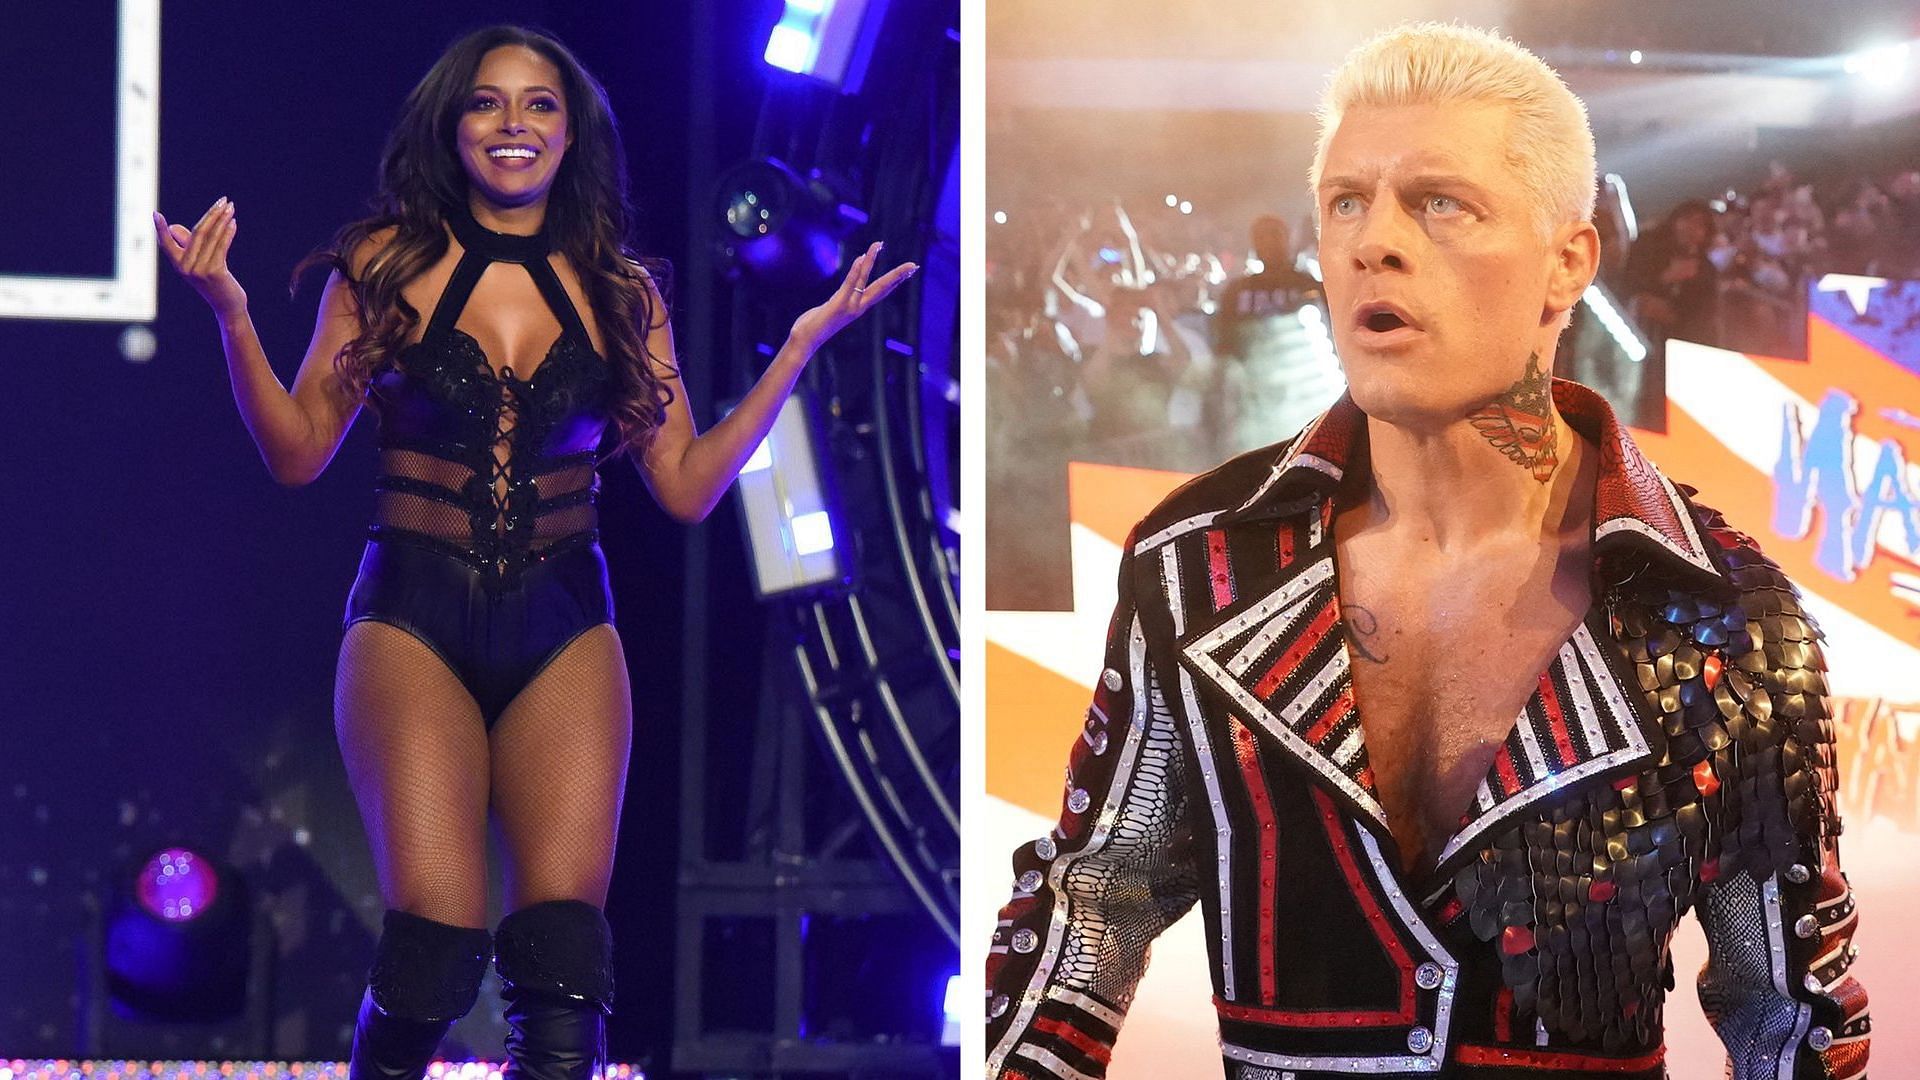 Brandi Rhodes could potentially appear on WWE television